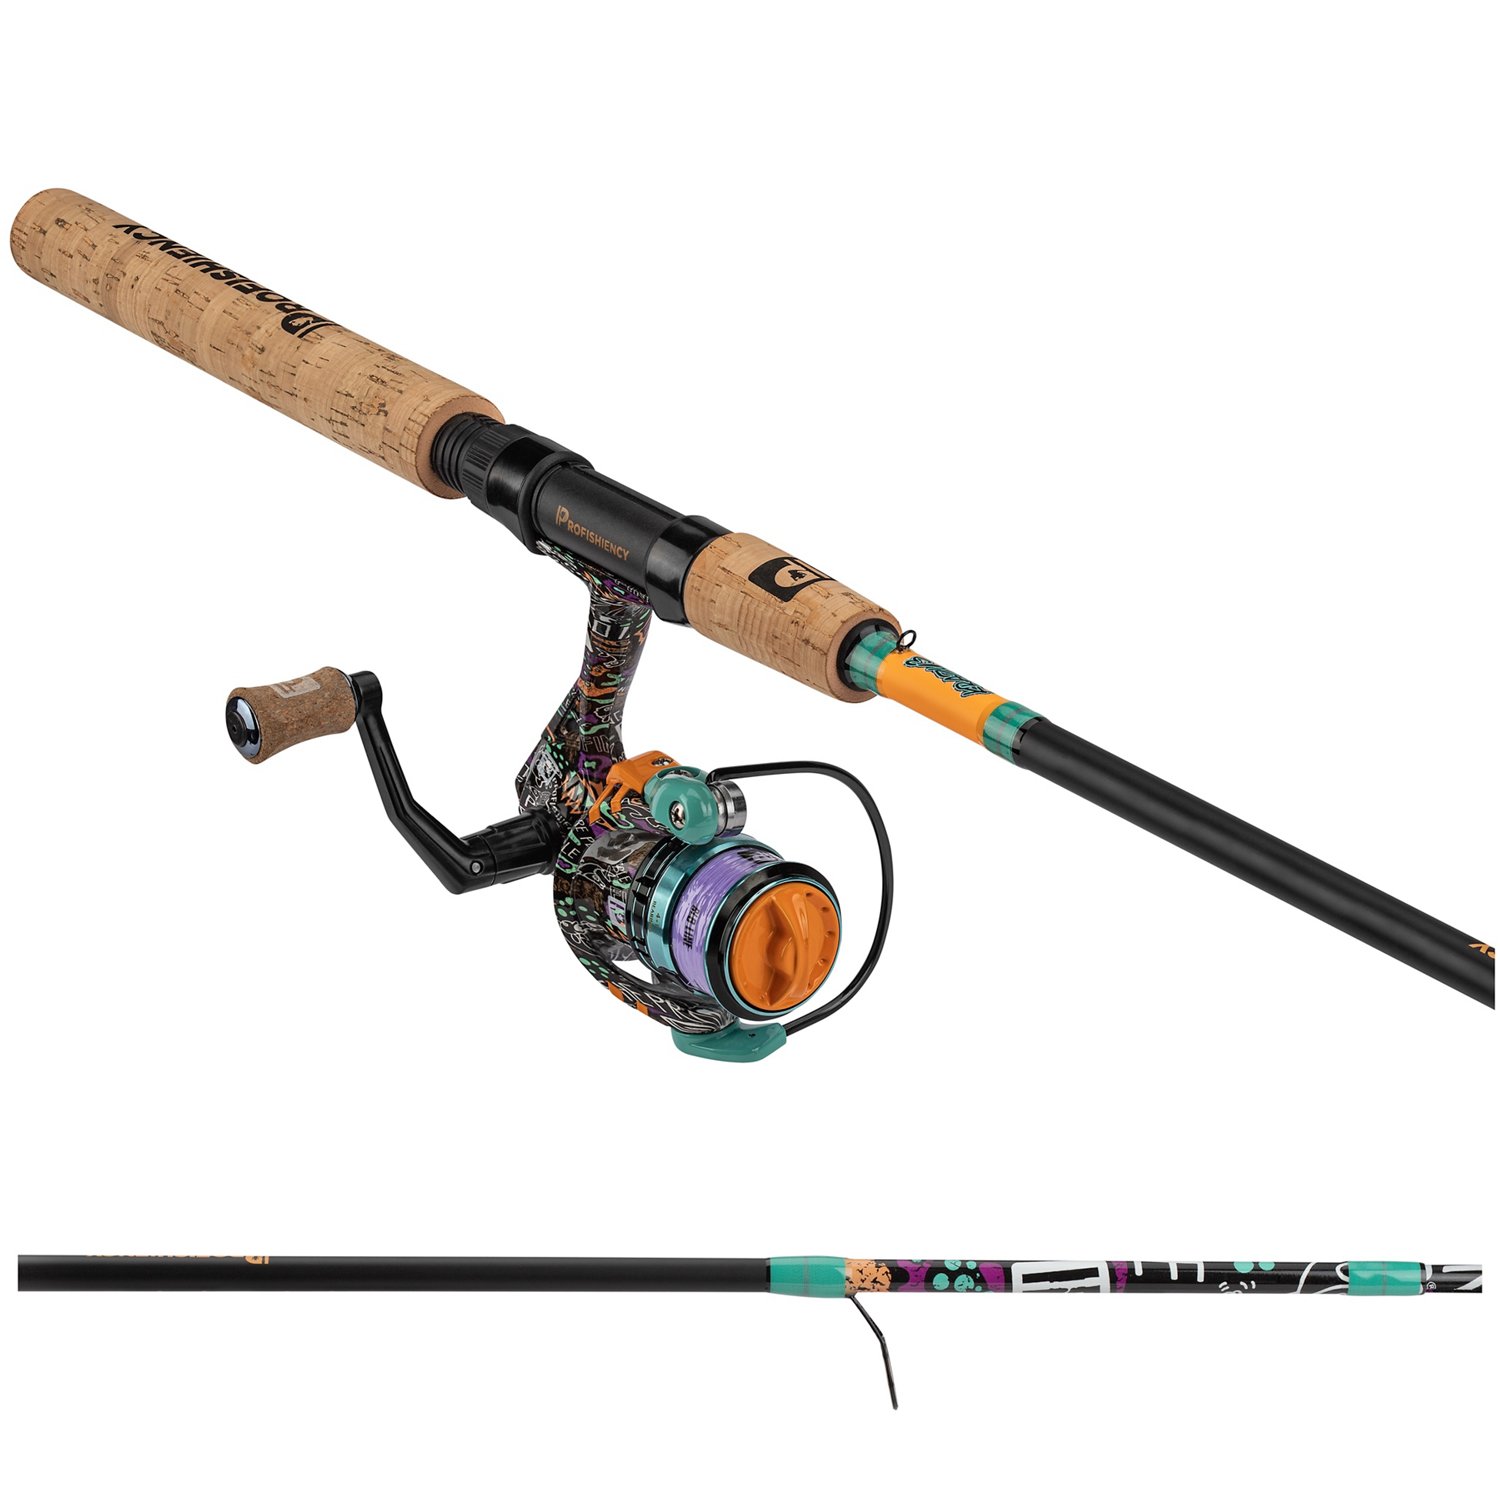 Spinning Rods Carbon Fiber Fishing Rod Or Rod Reel Combos Portable Telescopic  Fishing Pole 13BB Spinning Reel Fishing Set 230627 From Lian09, $16.82